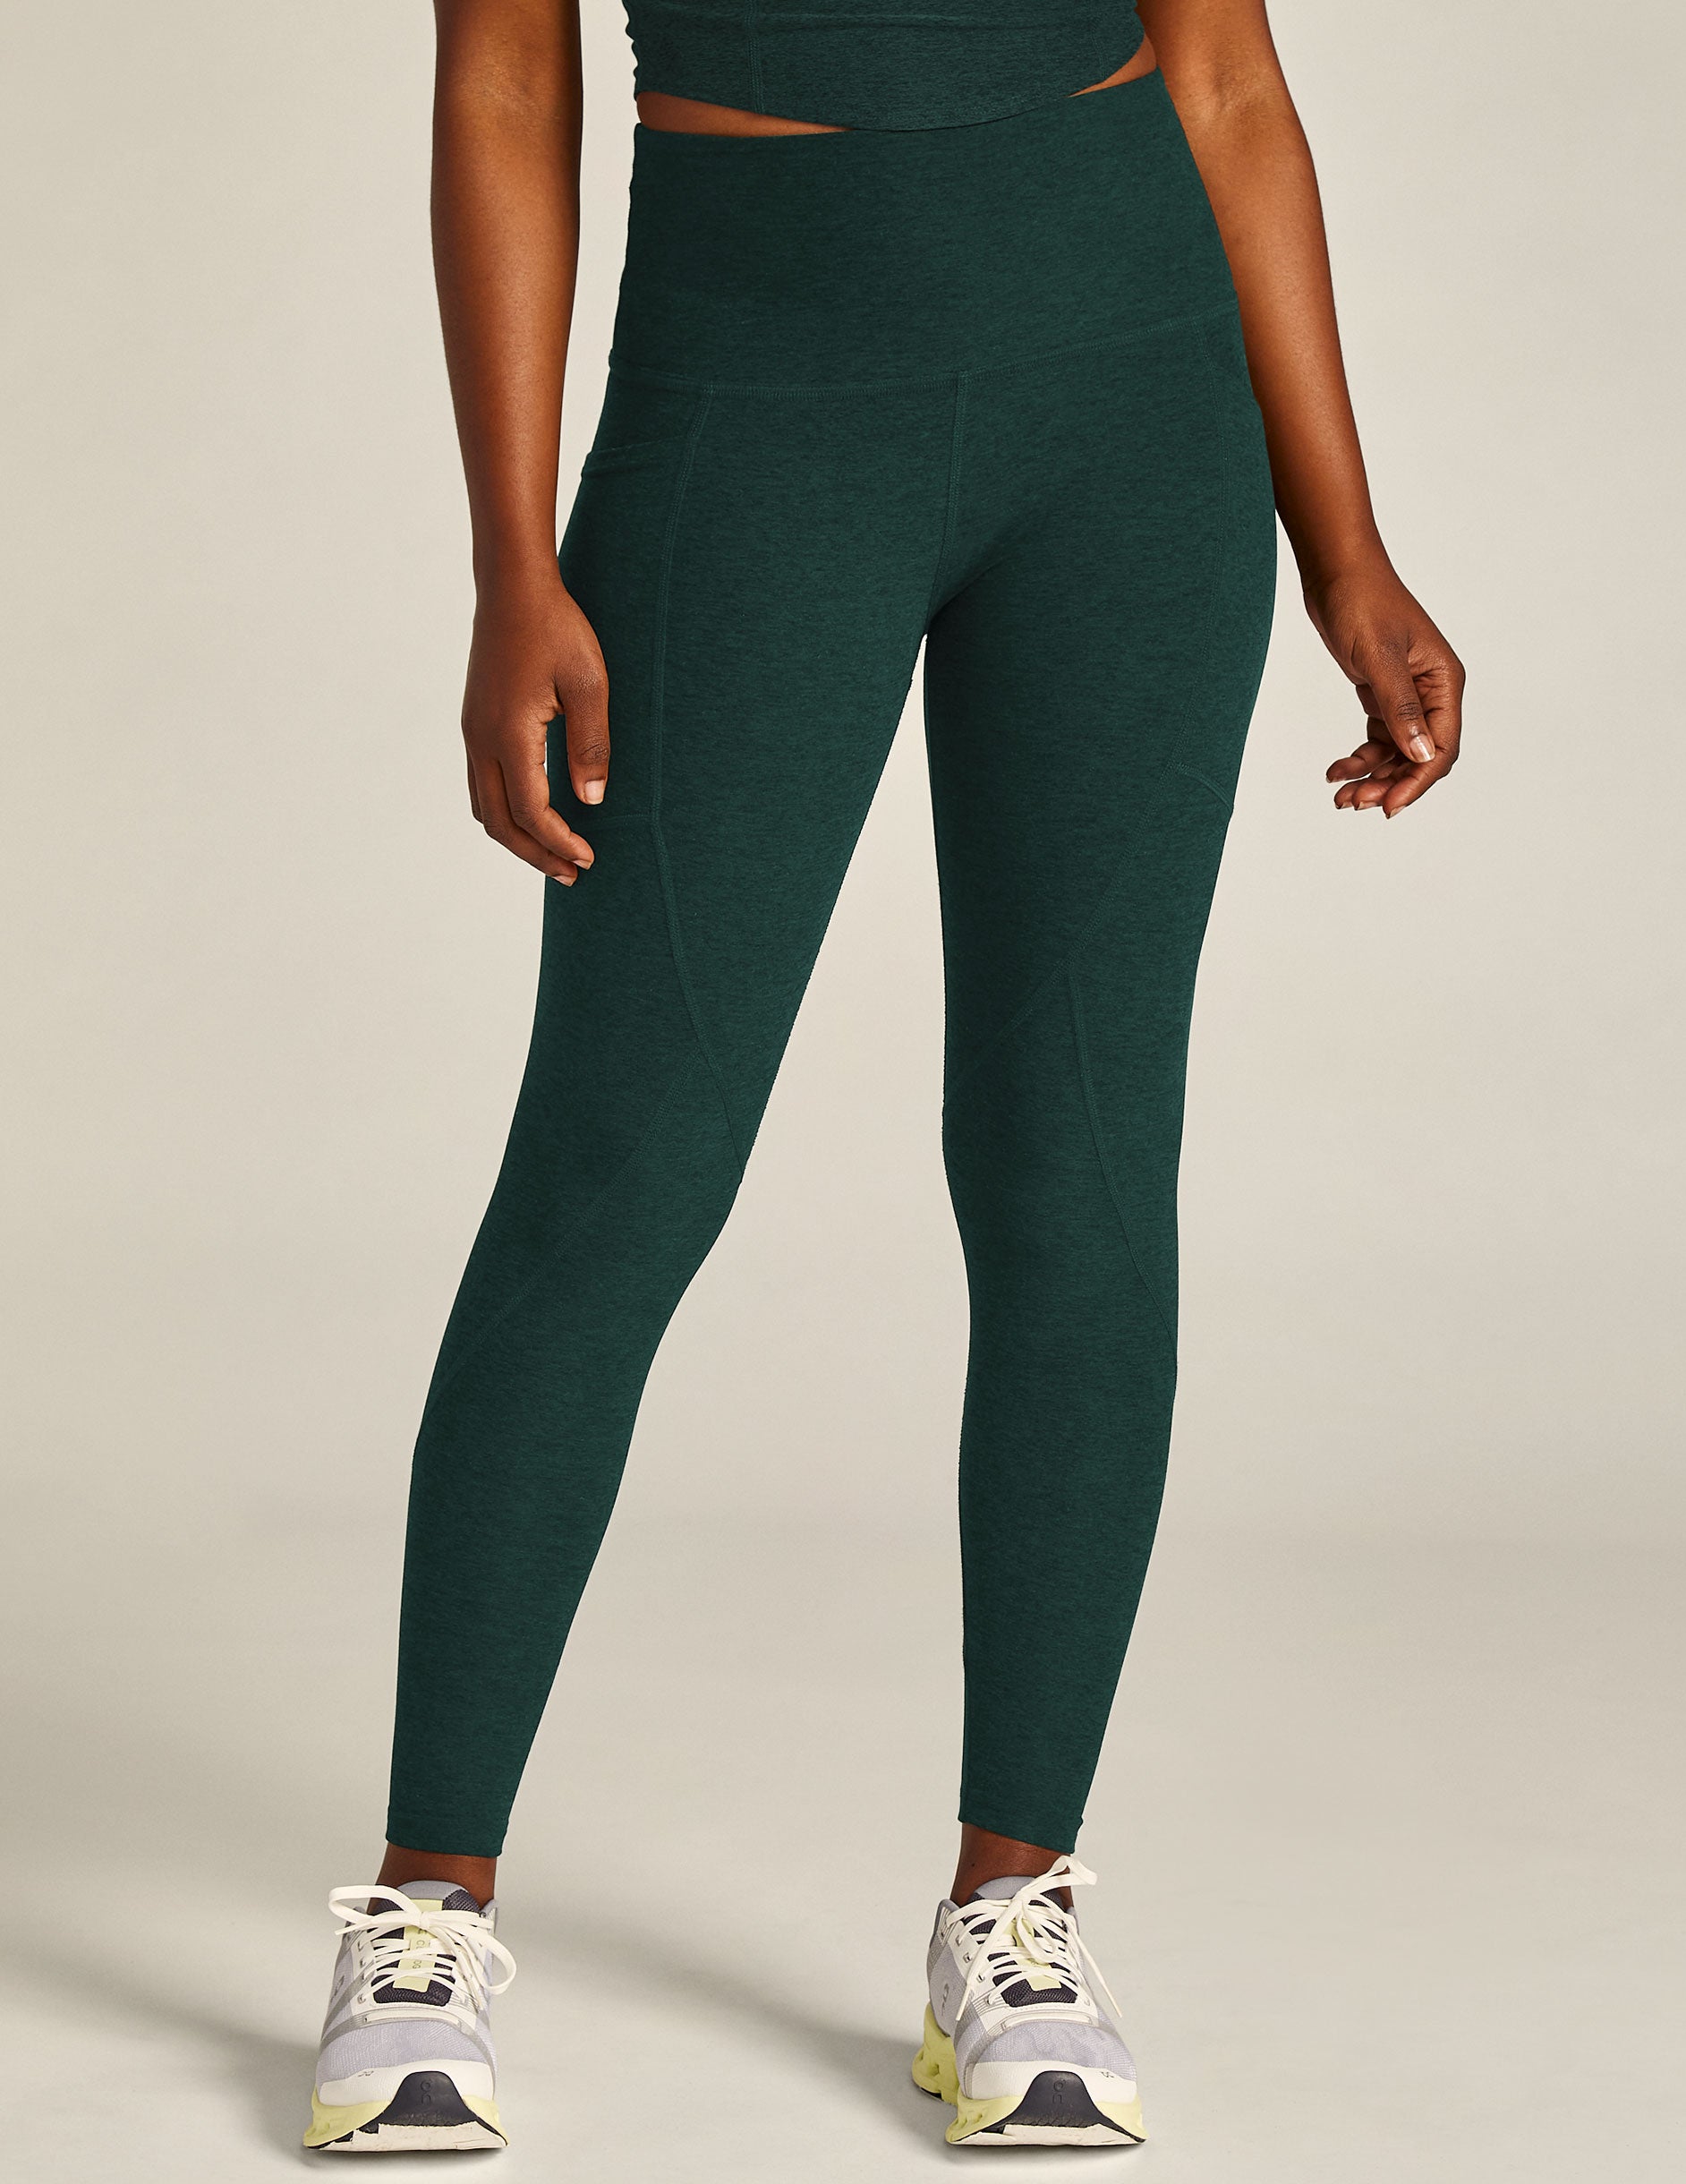 green high-waisted midi leggings with a side pocket. 